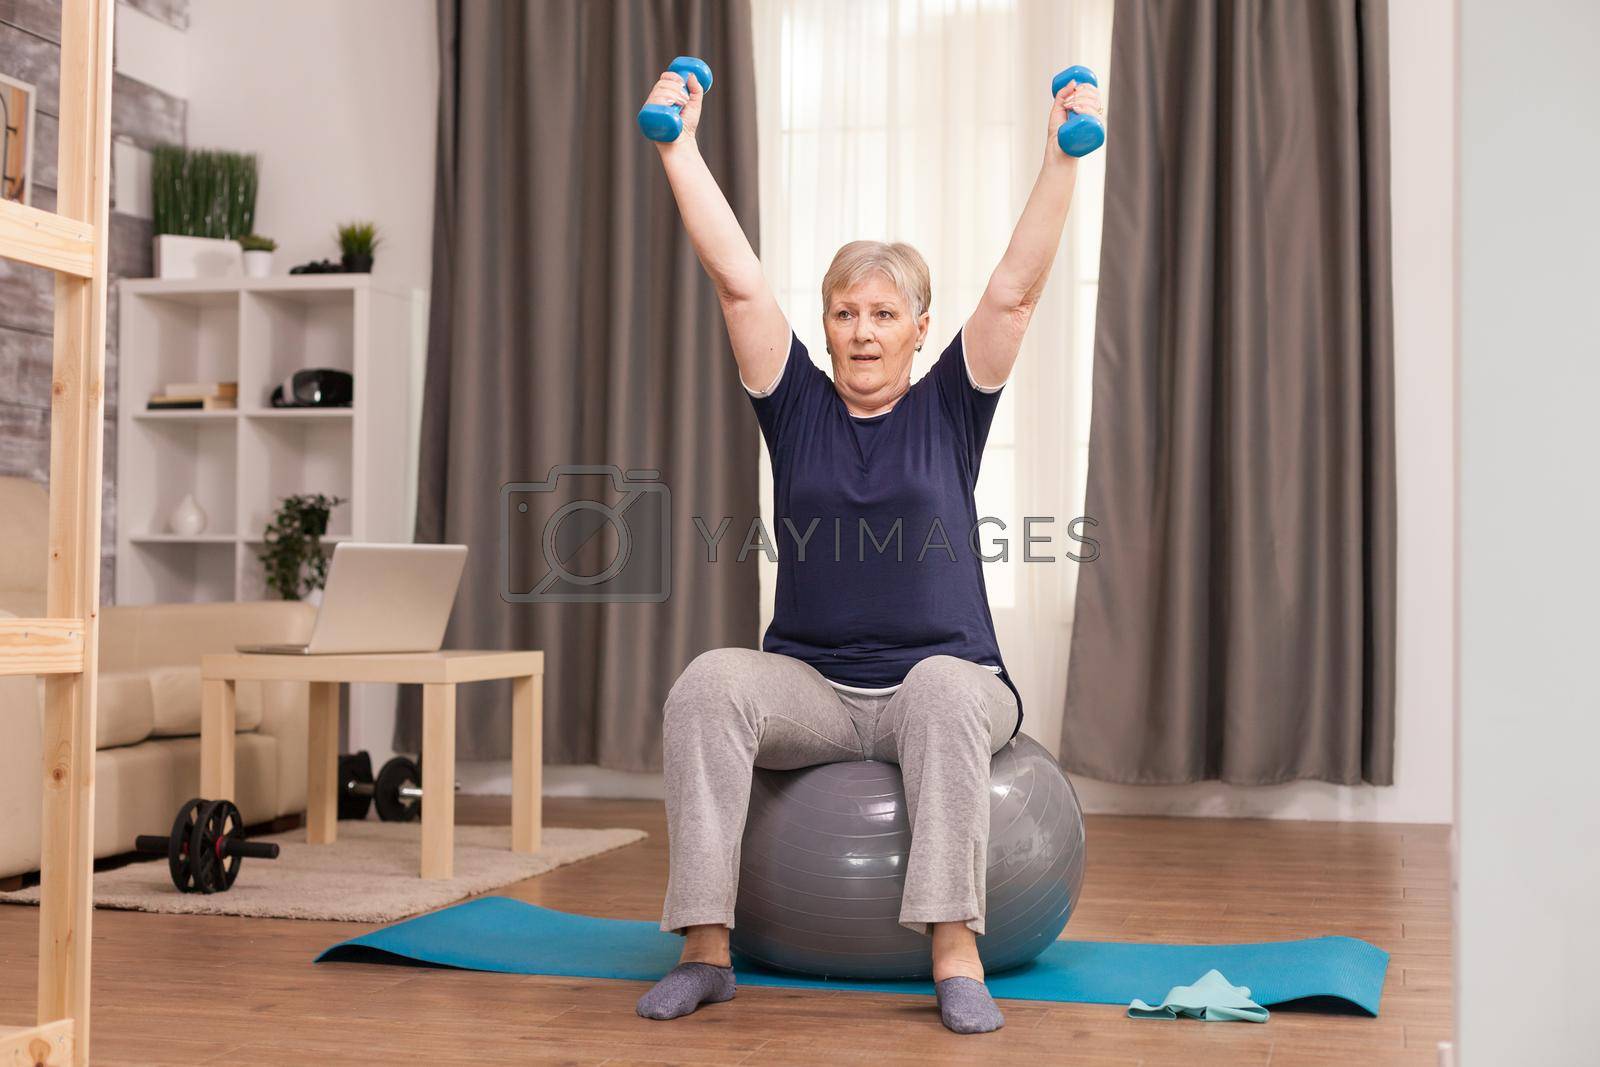 Grandmother with healthy lifestyle practicing fitness at home. Old person pensioner online internet exercise training at home sport activity with dumbbell, resistance band, swiss ball at elderly retirement age